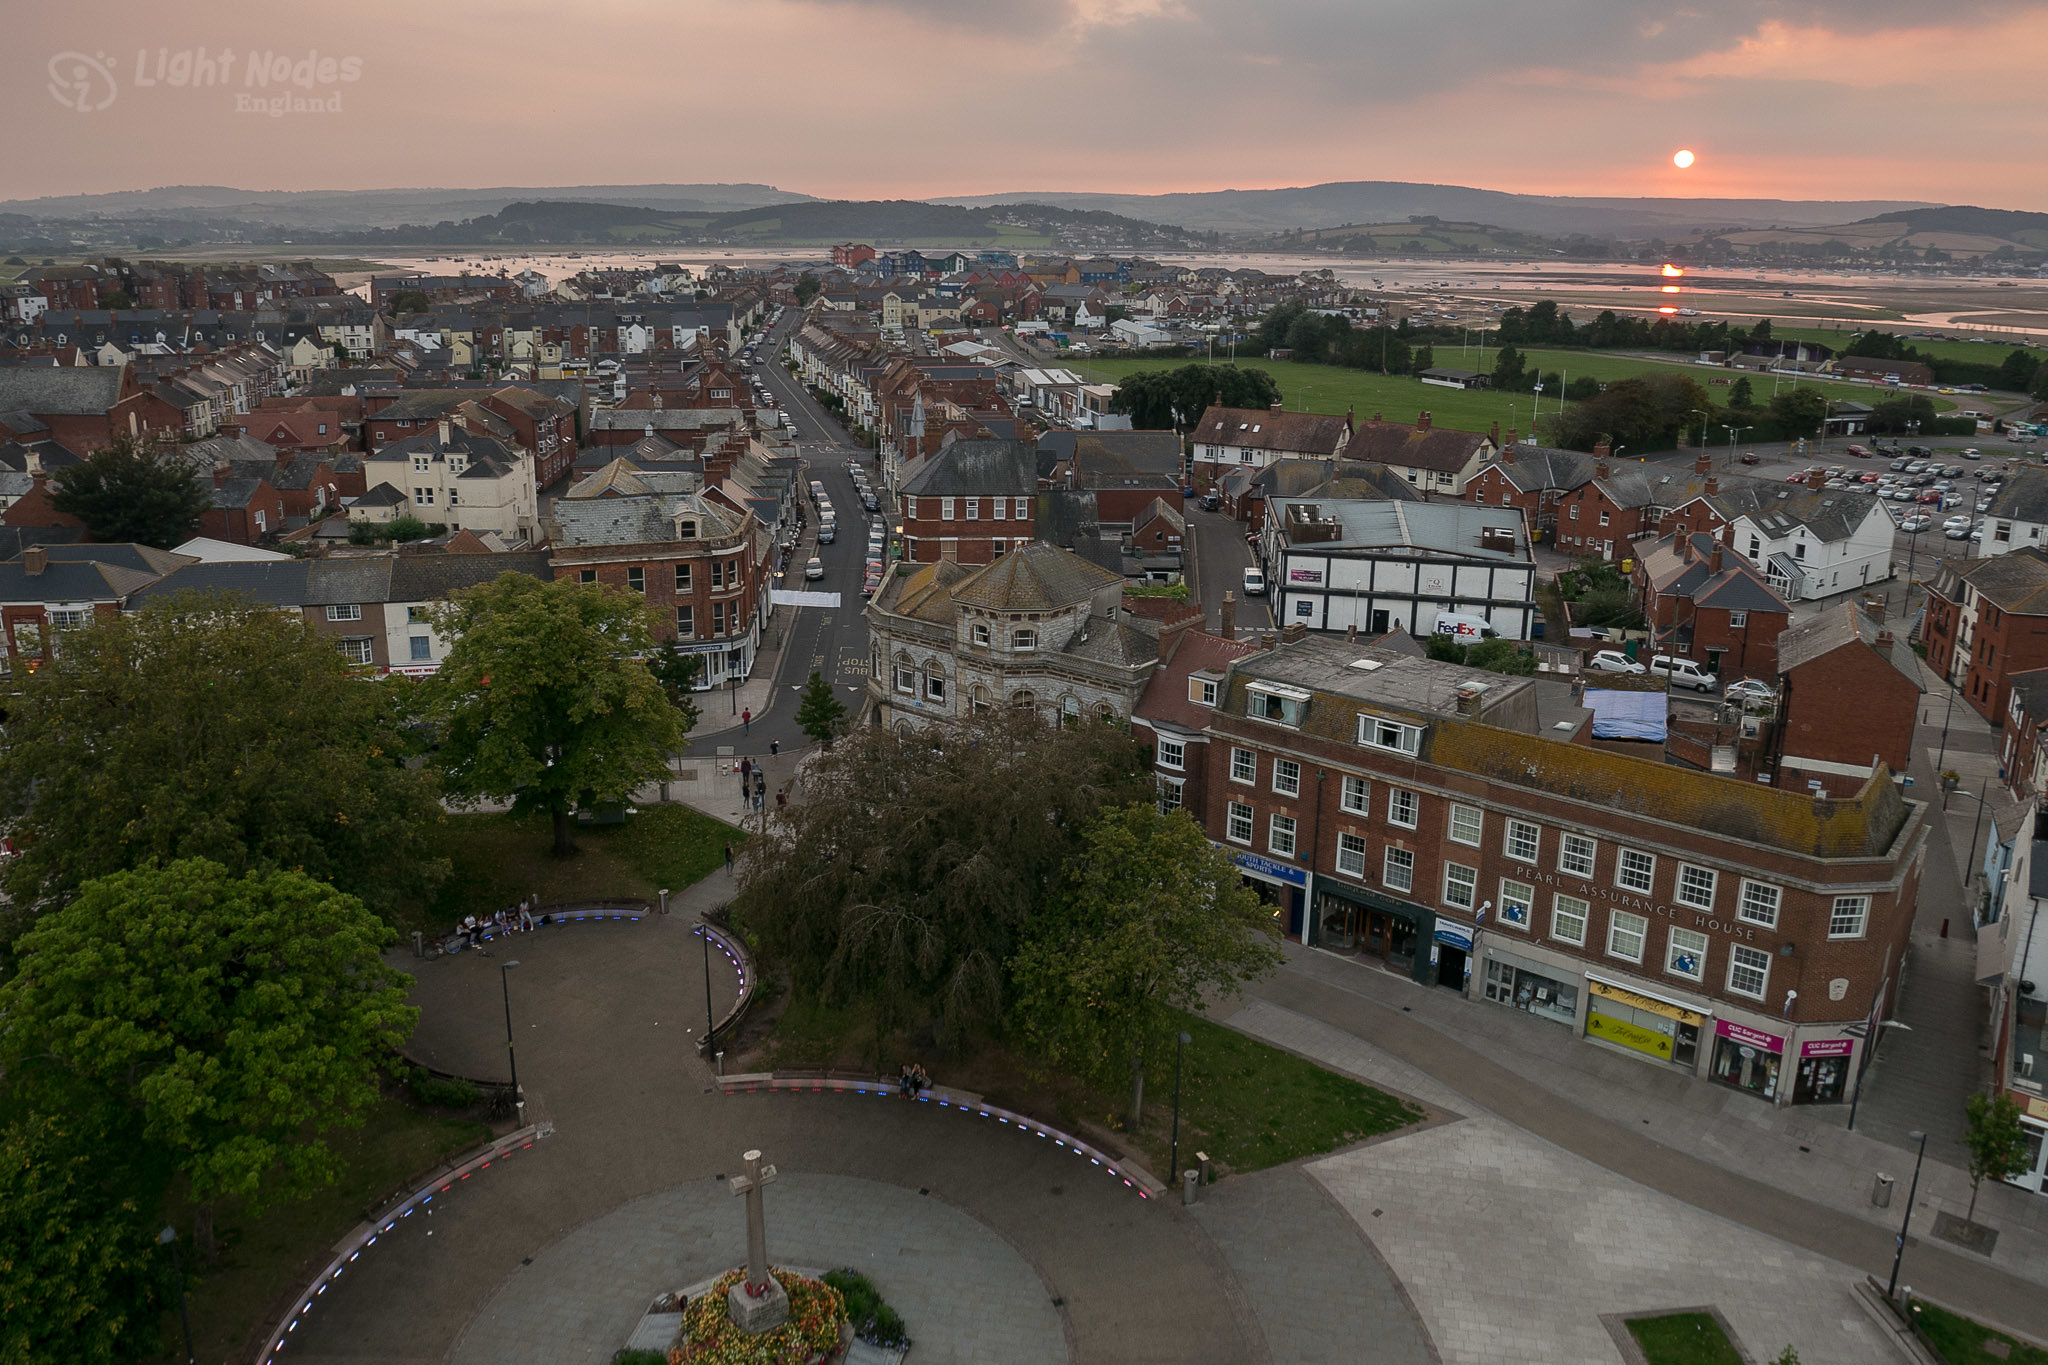 Sunset over Exmouth, Devon with GM1